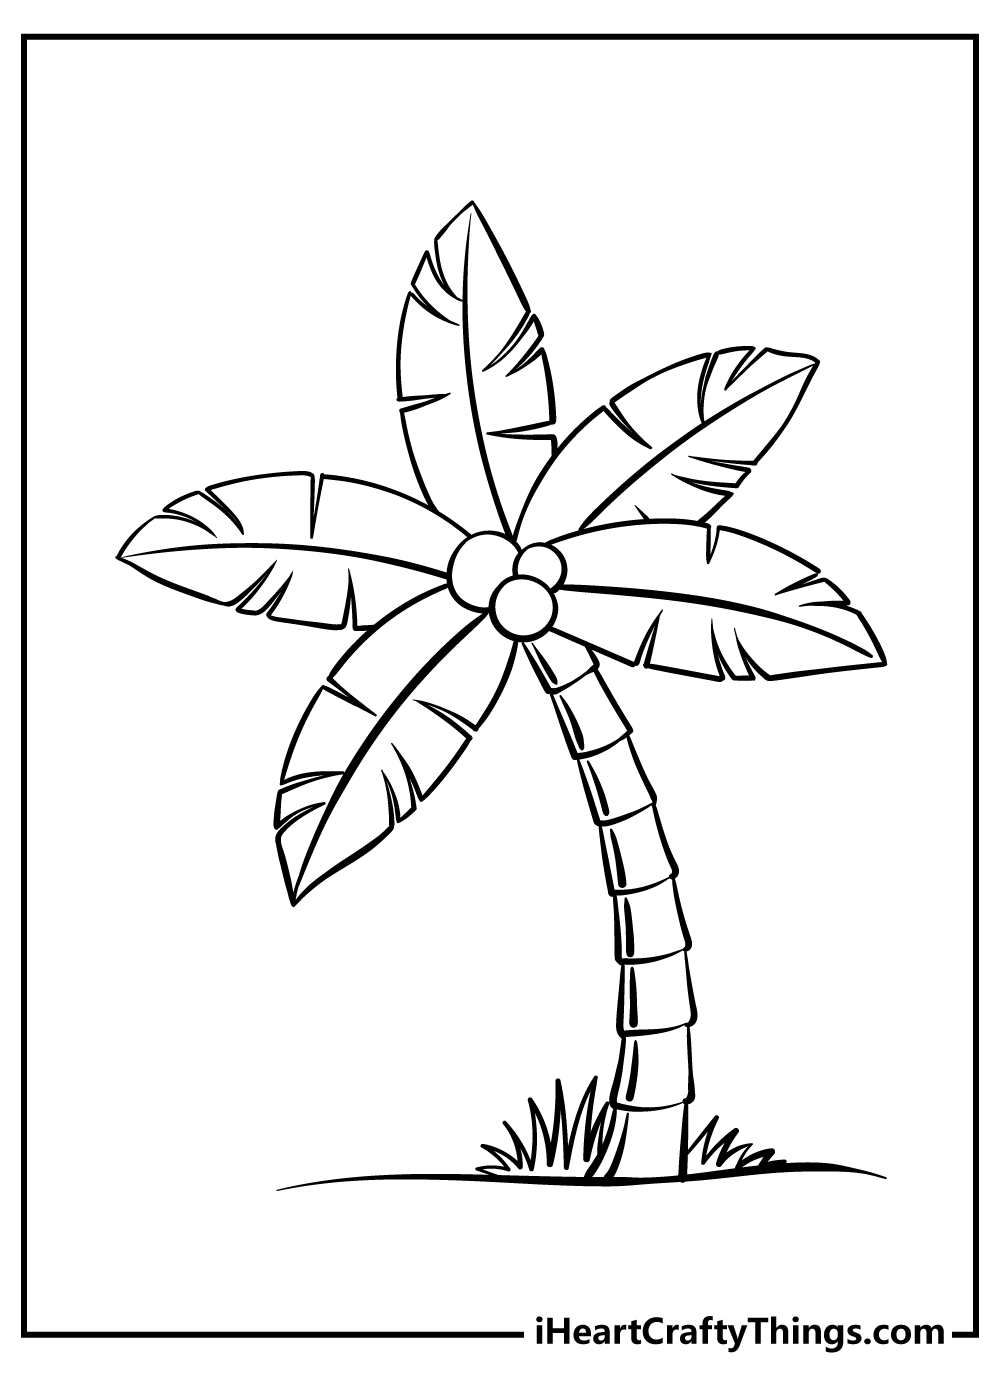 Palm Tree Coloring Book for kids free printable